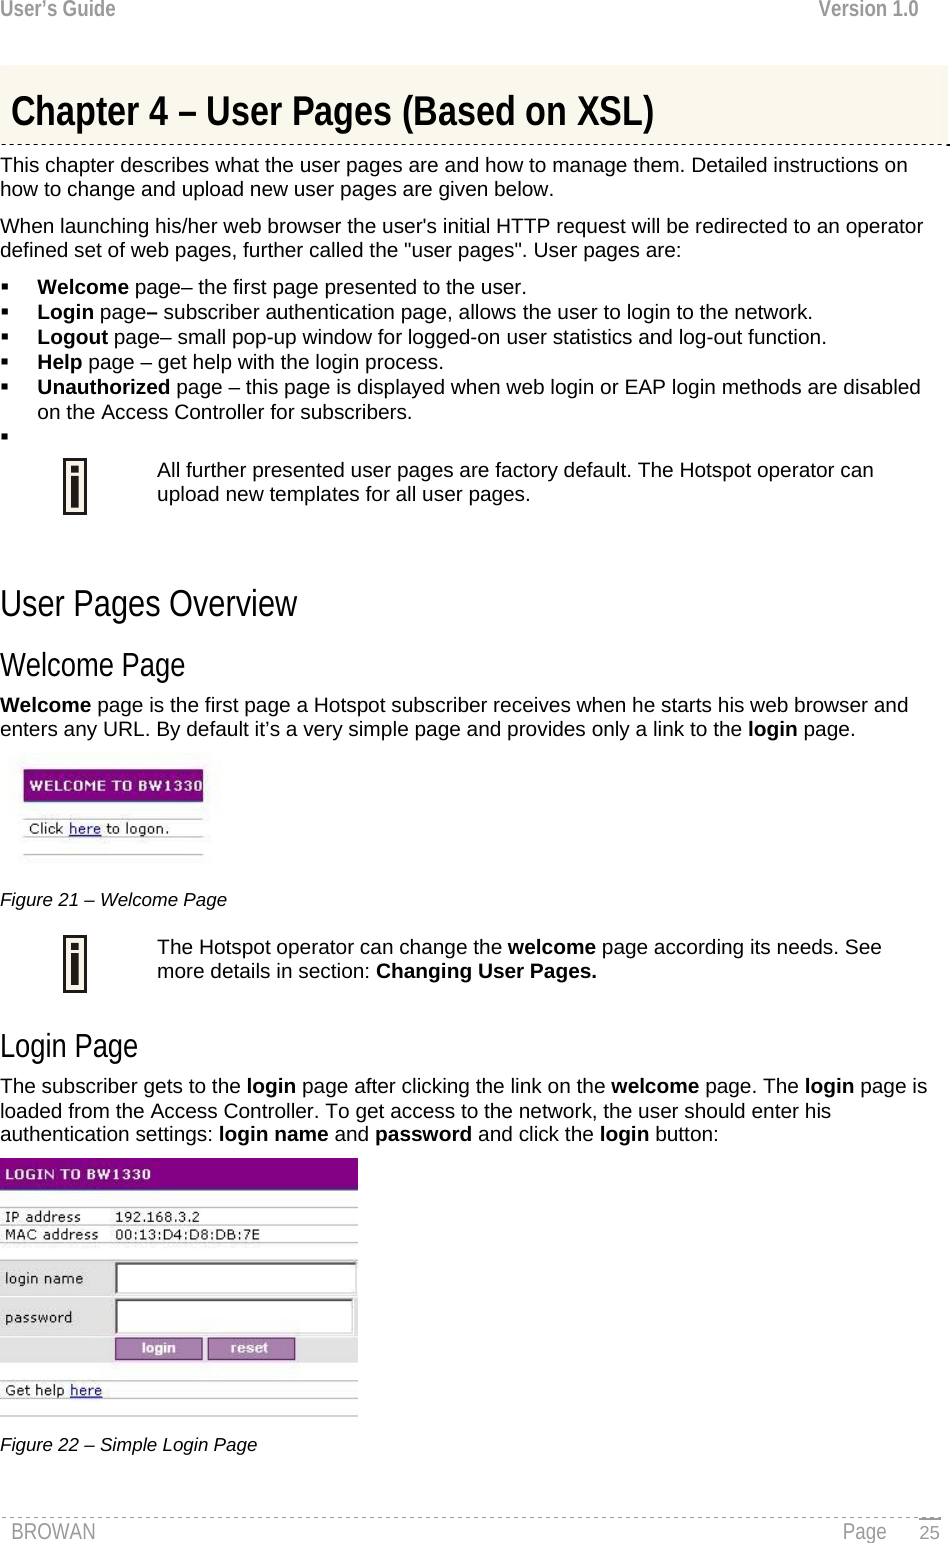 User’s Guide  Version 1.0  Chapter 4 – User Pages (Based on XSL) This chapter describes what the user pages are and how to manage them. Detailed instructions on how to change and upload new user pages are given below. When launching his/her web browser the user&apos;s initial HTTP request will be redirected to an operator defined set of web pages, further called the &quot;user pages&quot;. User pages are:  Welcome page– the first page presented to the user.  Login page– subscriber authentication page, allows the user to login to the network.  Logout page– small pop-up window for logged-on user statistics and log-out function.  Help page – get help with the login process.  Unauthorized page – this page is displayed when web login or EAP login methods are disabled on the Access Controller for subscribers.   All further presented user pages are factory default. The Hotspot operator can upload new templates for all user pages.   User Pages Overview Welcome Page Welcome page is the first page a Hotspot subscriber receives when he starts his web browser and enters any URL. By default it’s a very simple page and provides only a link to the login page.  Figure 21 – Welcome Page The Hotspot operator can change the welcome page according its needs. See more details in section: Changing User Pages.  Login Page The subscriber gets to the login page after clicking the link on the welcome page. The login page is loaded from the Access Controller. To get access to the network, the user should enter his authentication settings: login name and password and click the login button:  Figure 22 – Simple Login Page BROWAN                                                                                                                                               Page   25